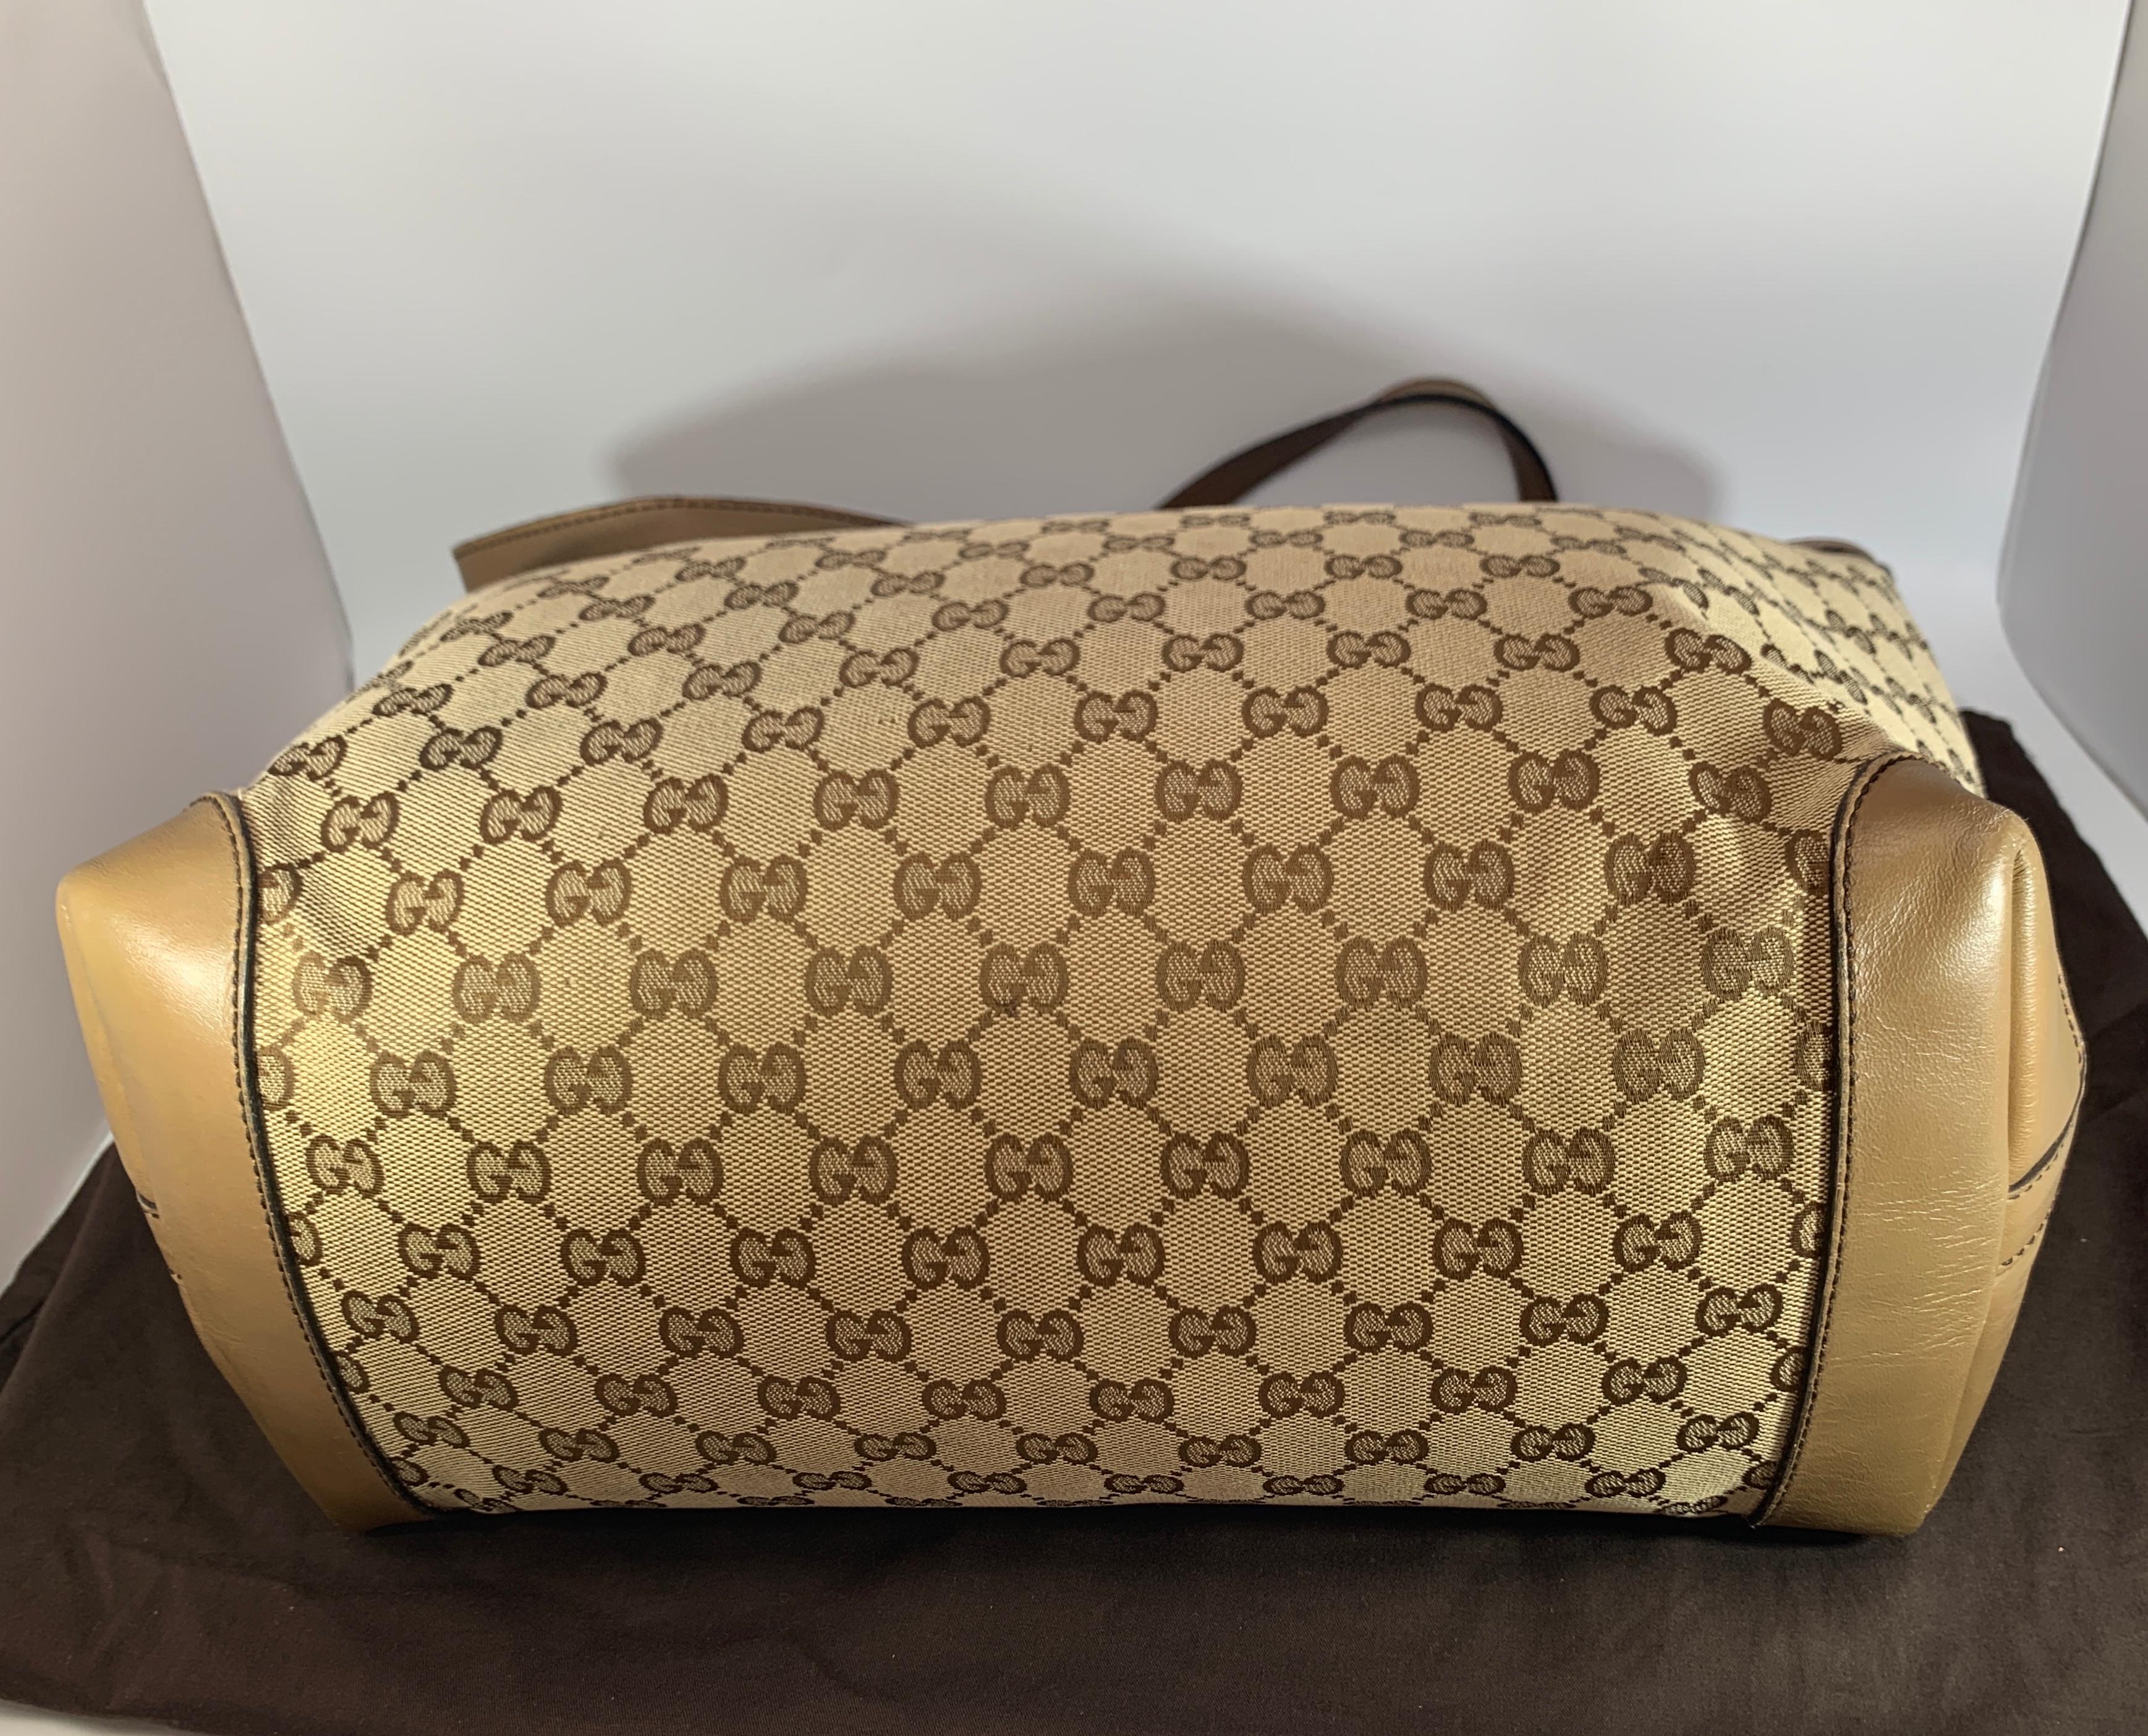 GUCCI Monogram Large Original Tote Tan With Pouch, Like Neverfull